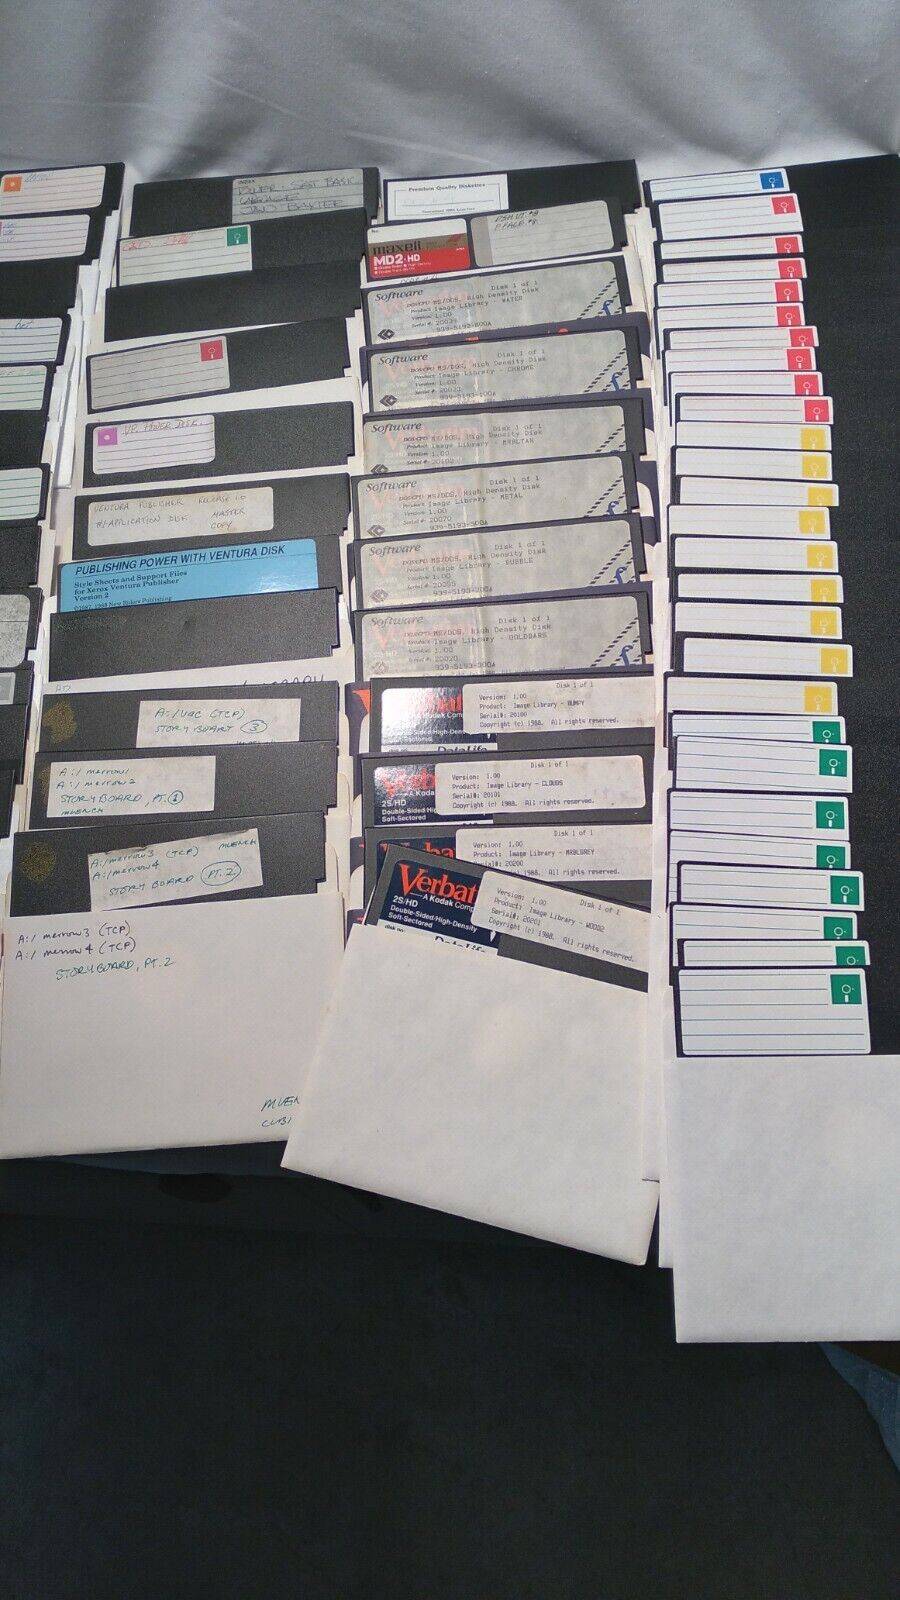 LOT OF 143 (143 total disks) 5.25" Floppy Disks MS-DOS Freeware /Blank/ Software MS DOS - фотография #7